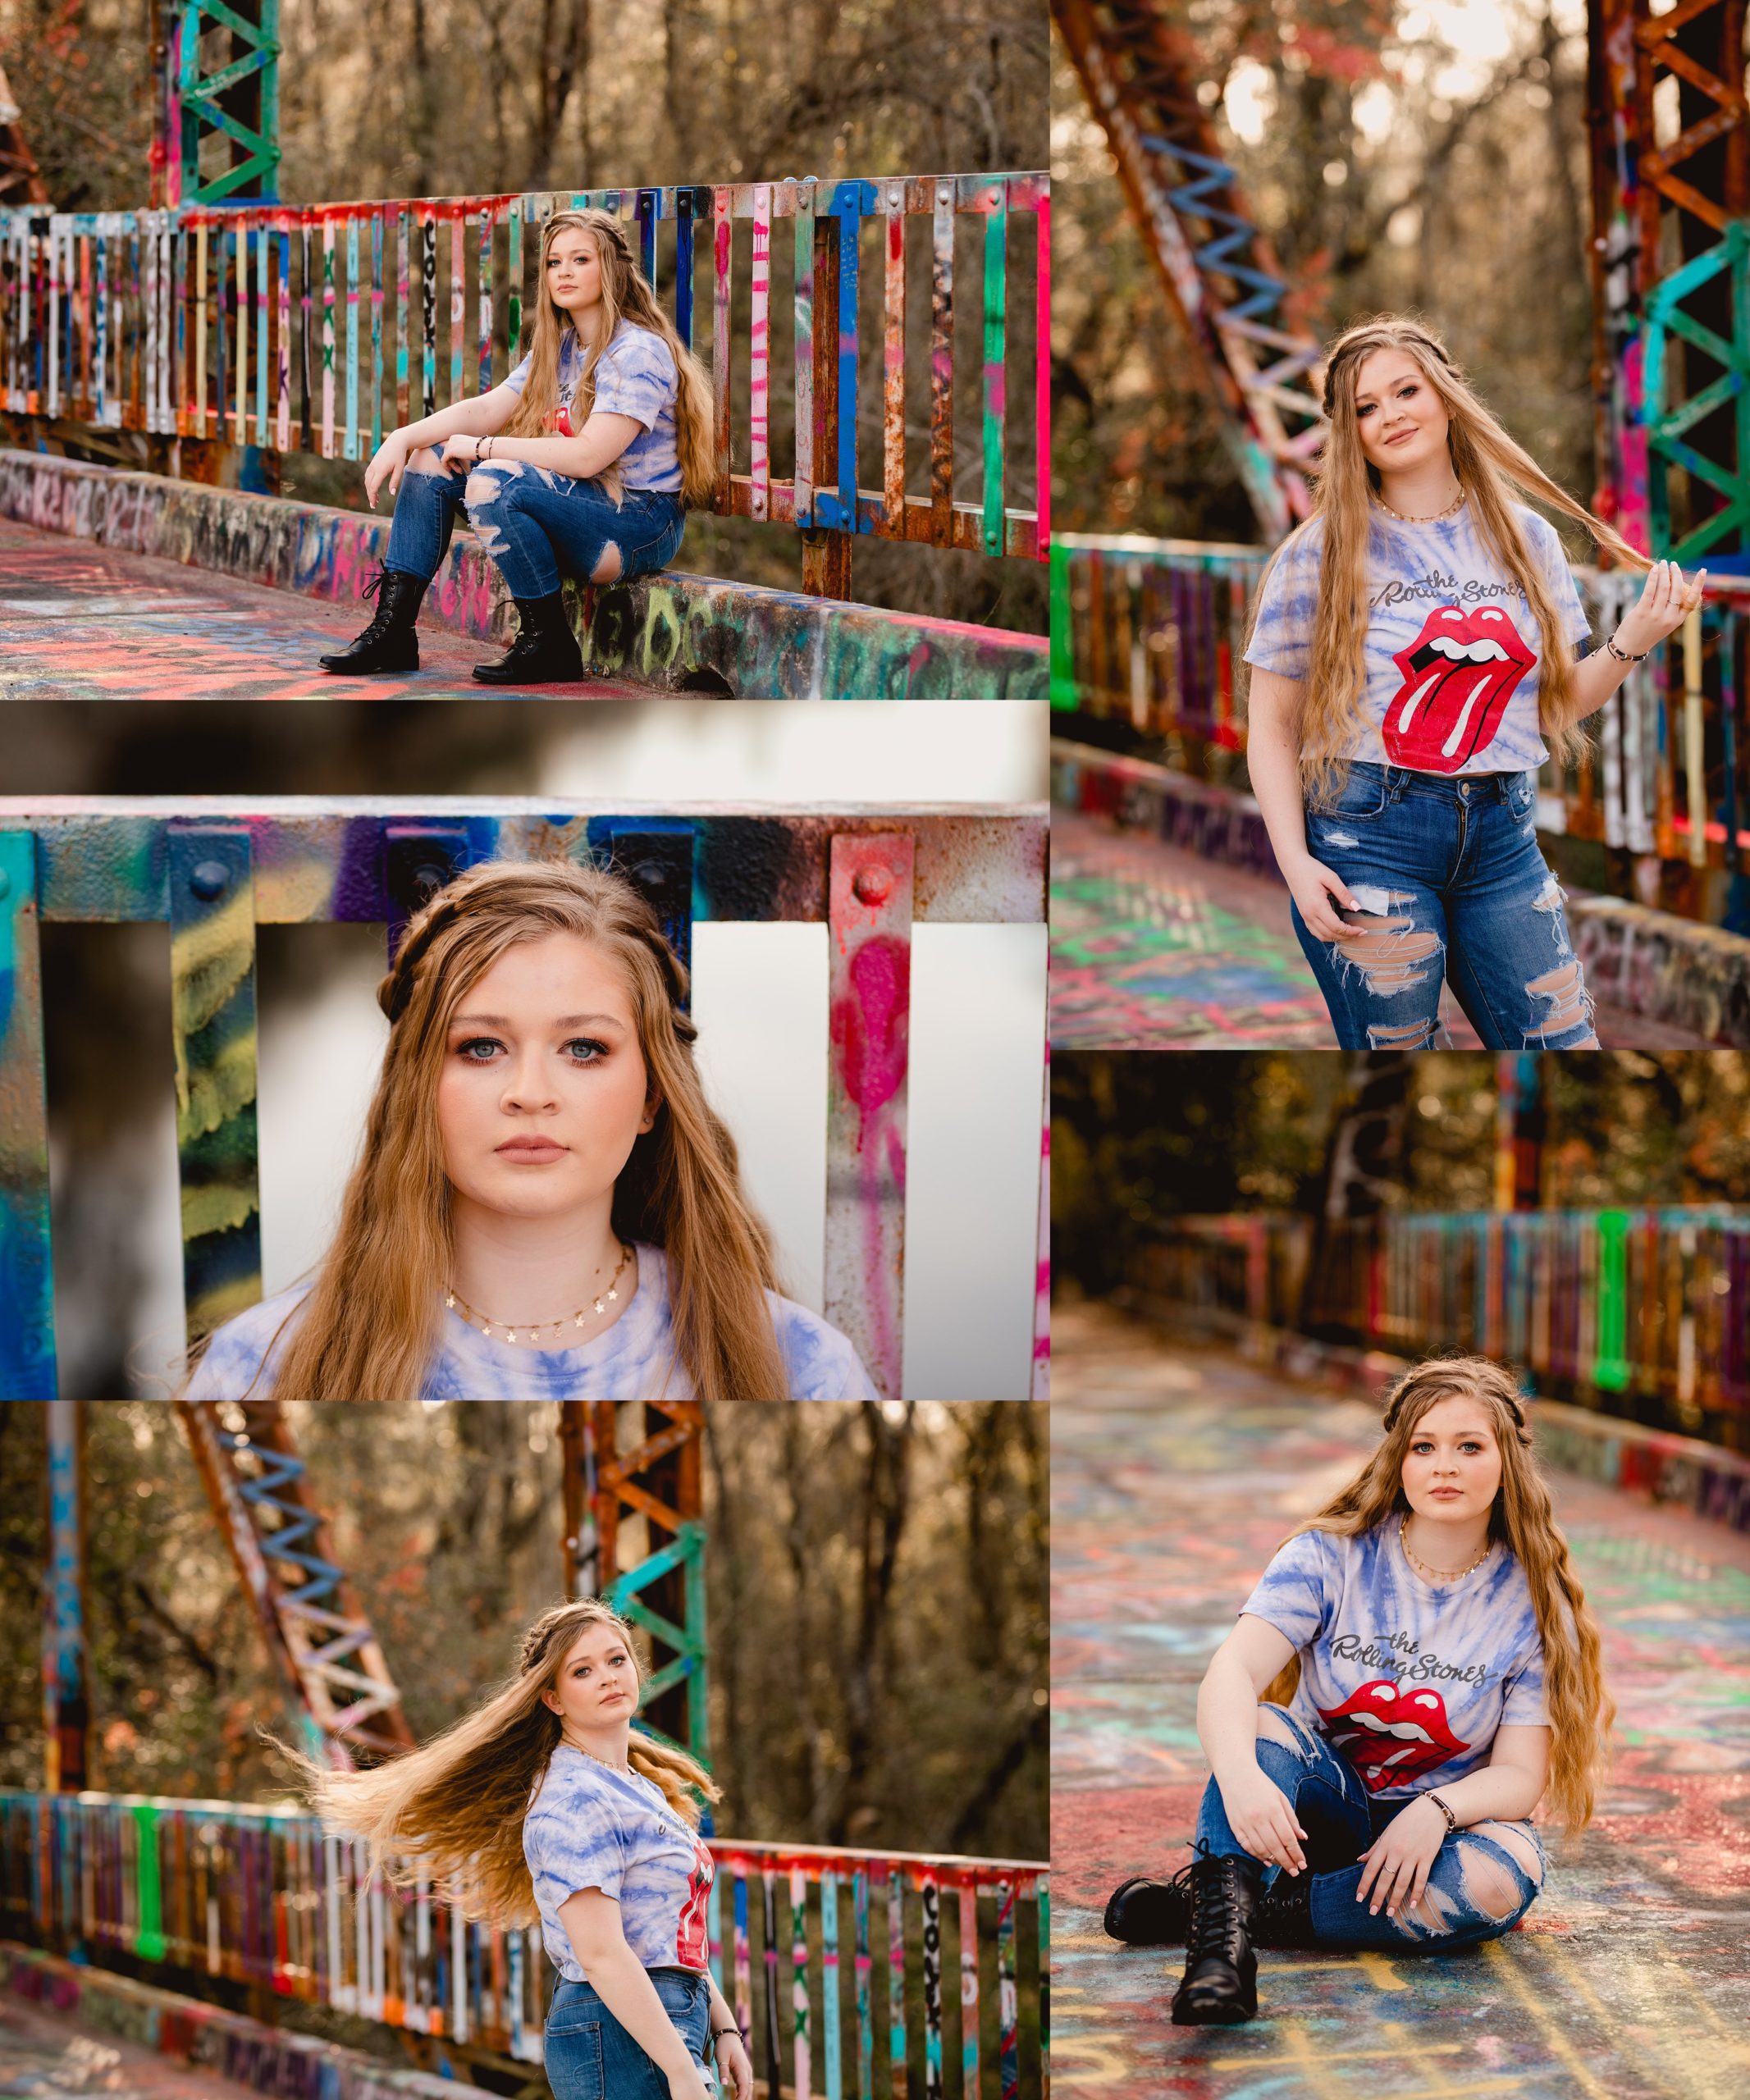 Graffiti bridge backdrop for senior pictures in North florida with rock t-shirts